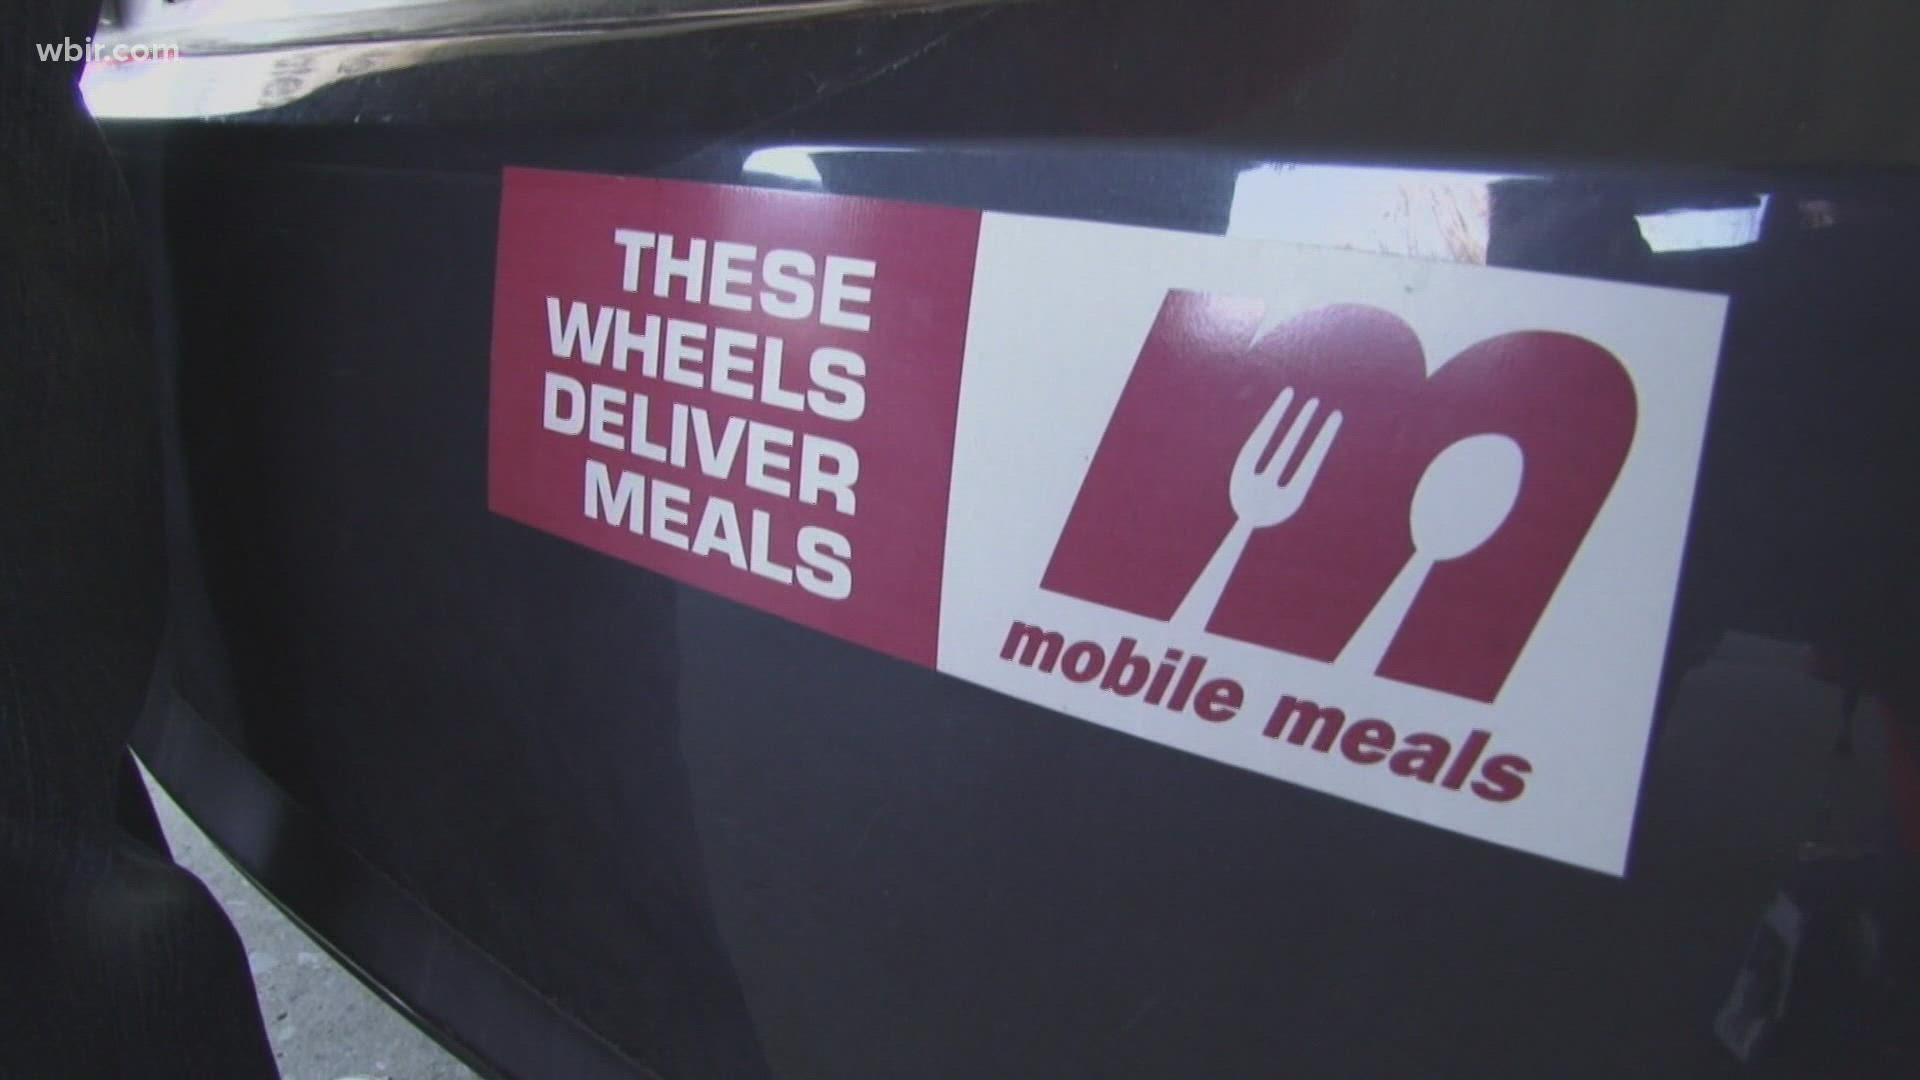 Knox County Mobile Meals program says they have seen a drop in volunteers after the inflation of gas prices.